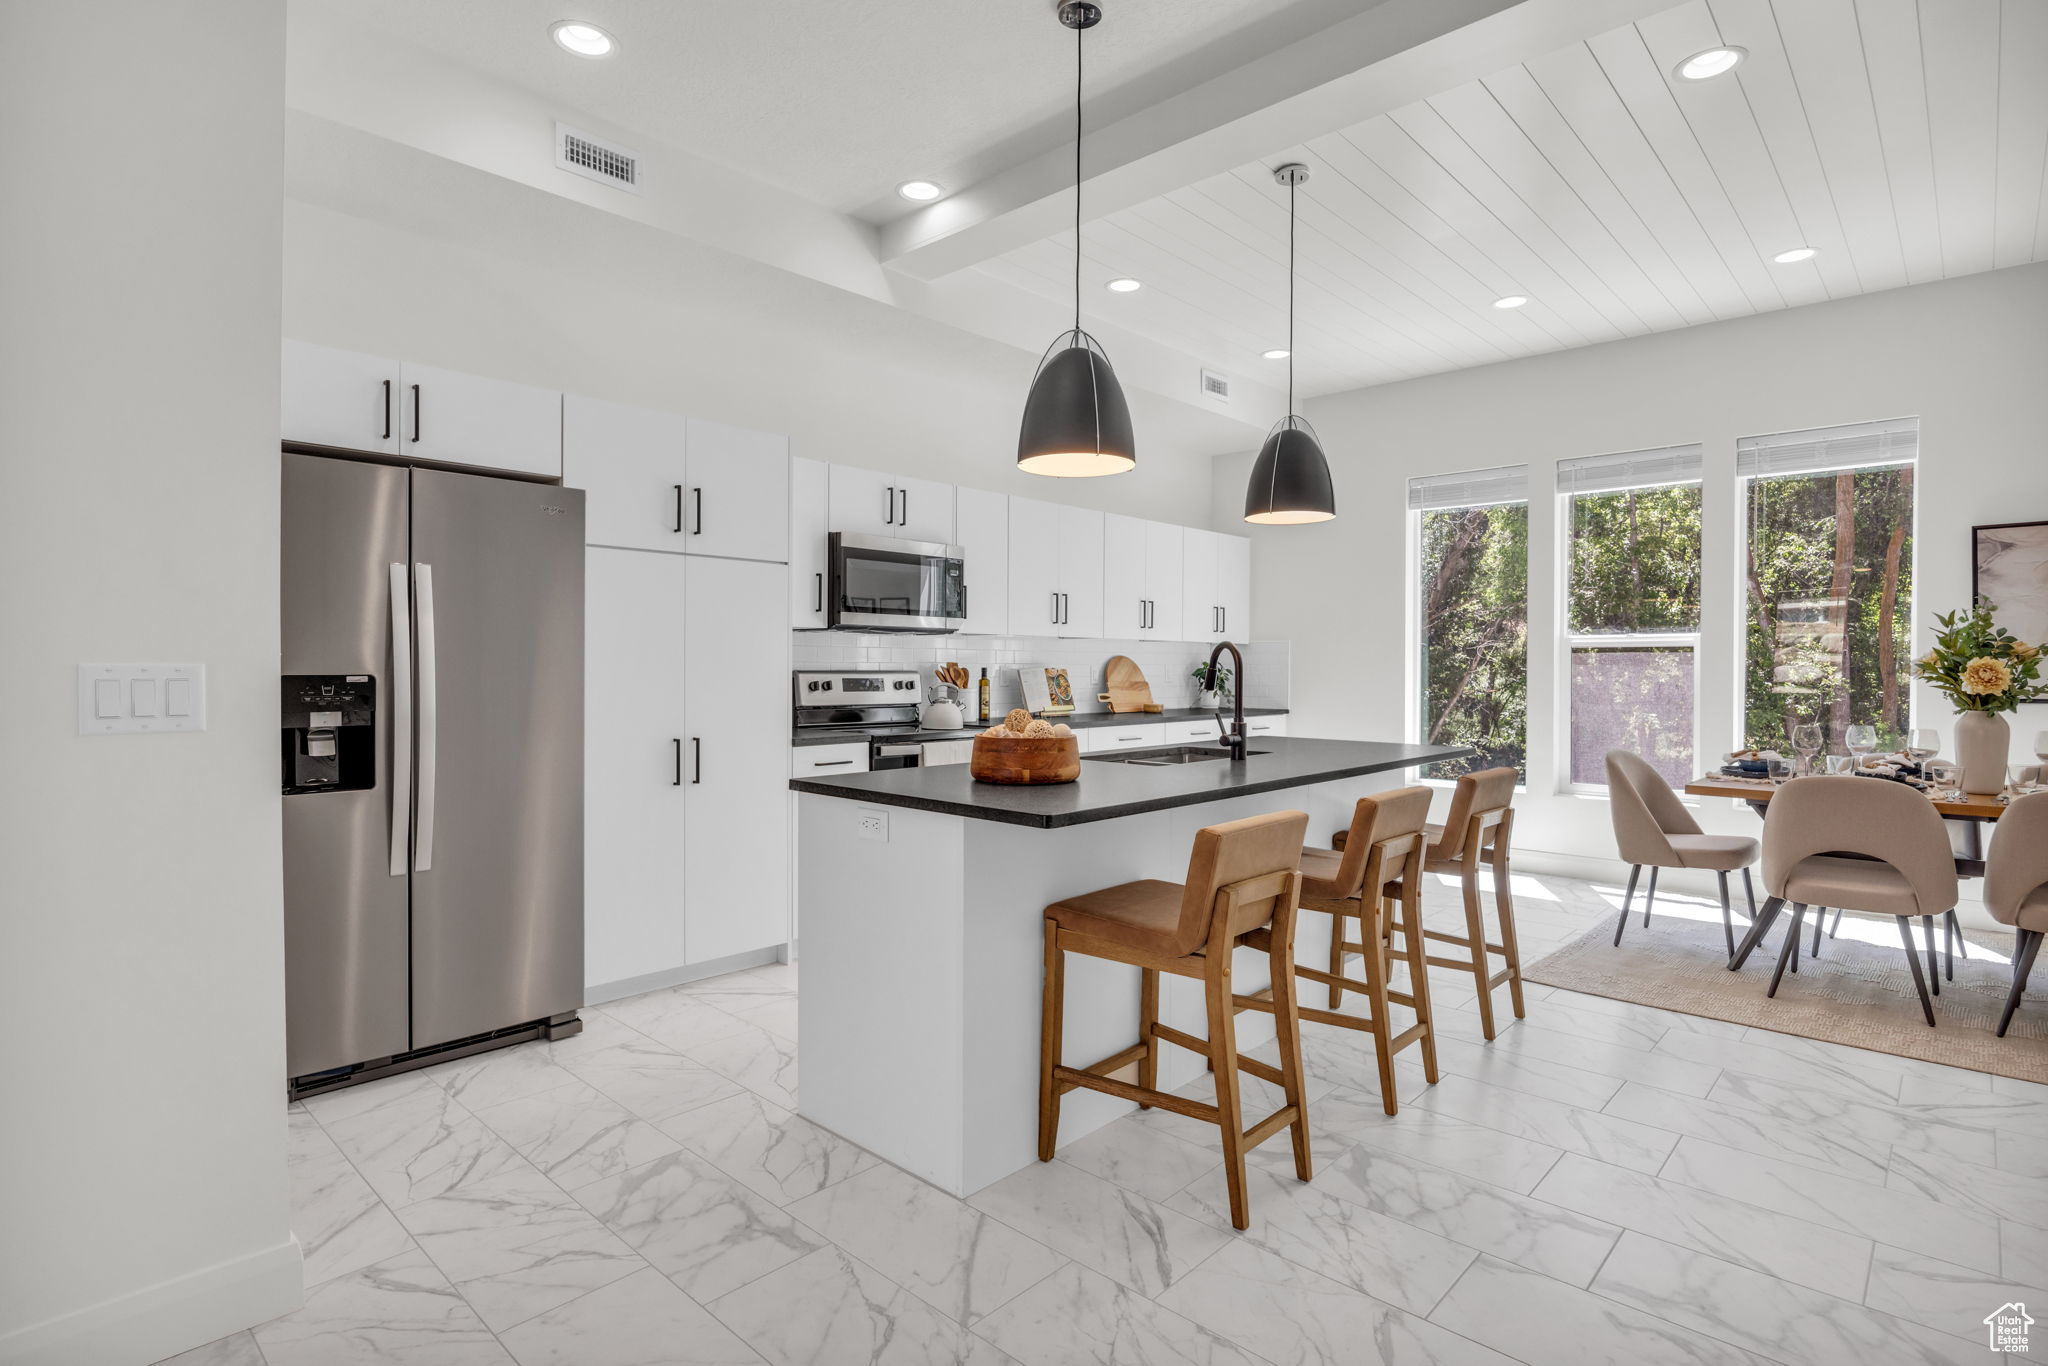 Kitchen featuring beamed ceiling, light tile floors, a kitchen island with sink, white cabinetry, and appliances with stainless steel finishes